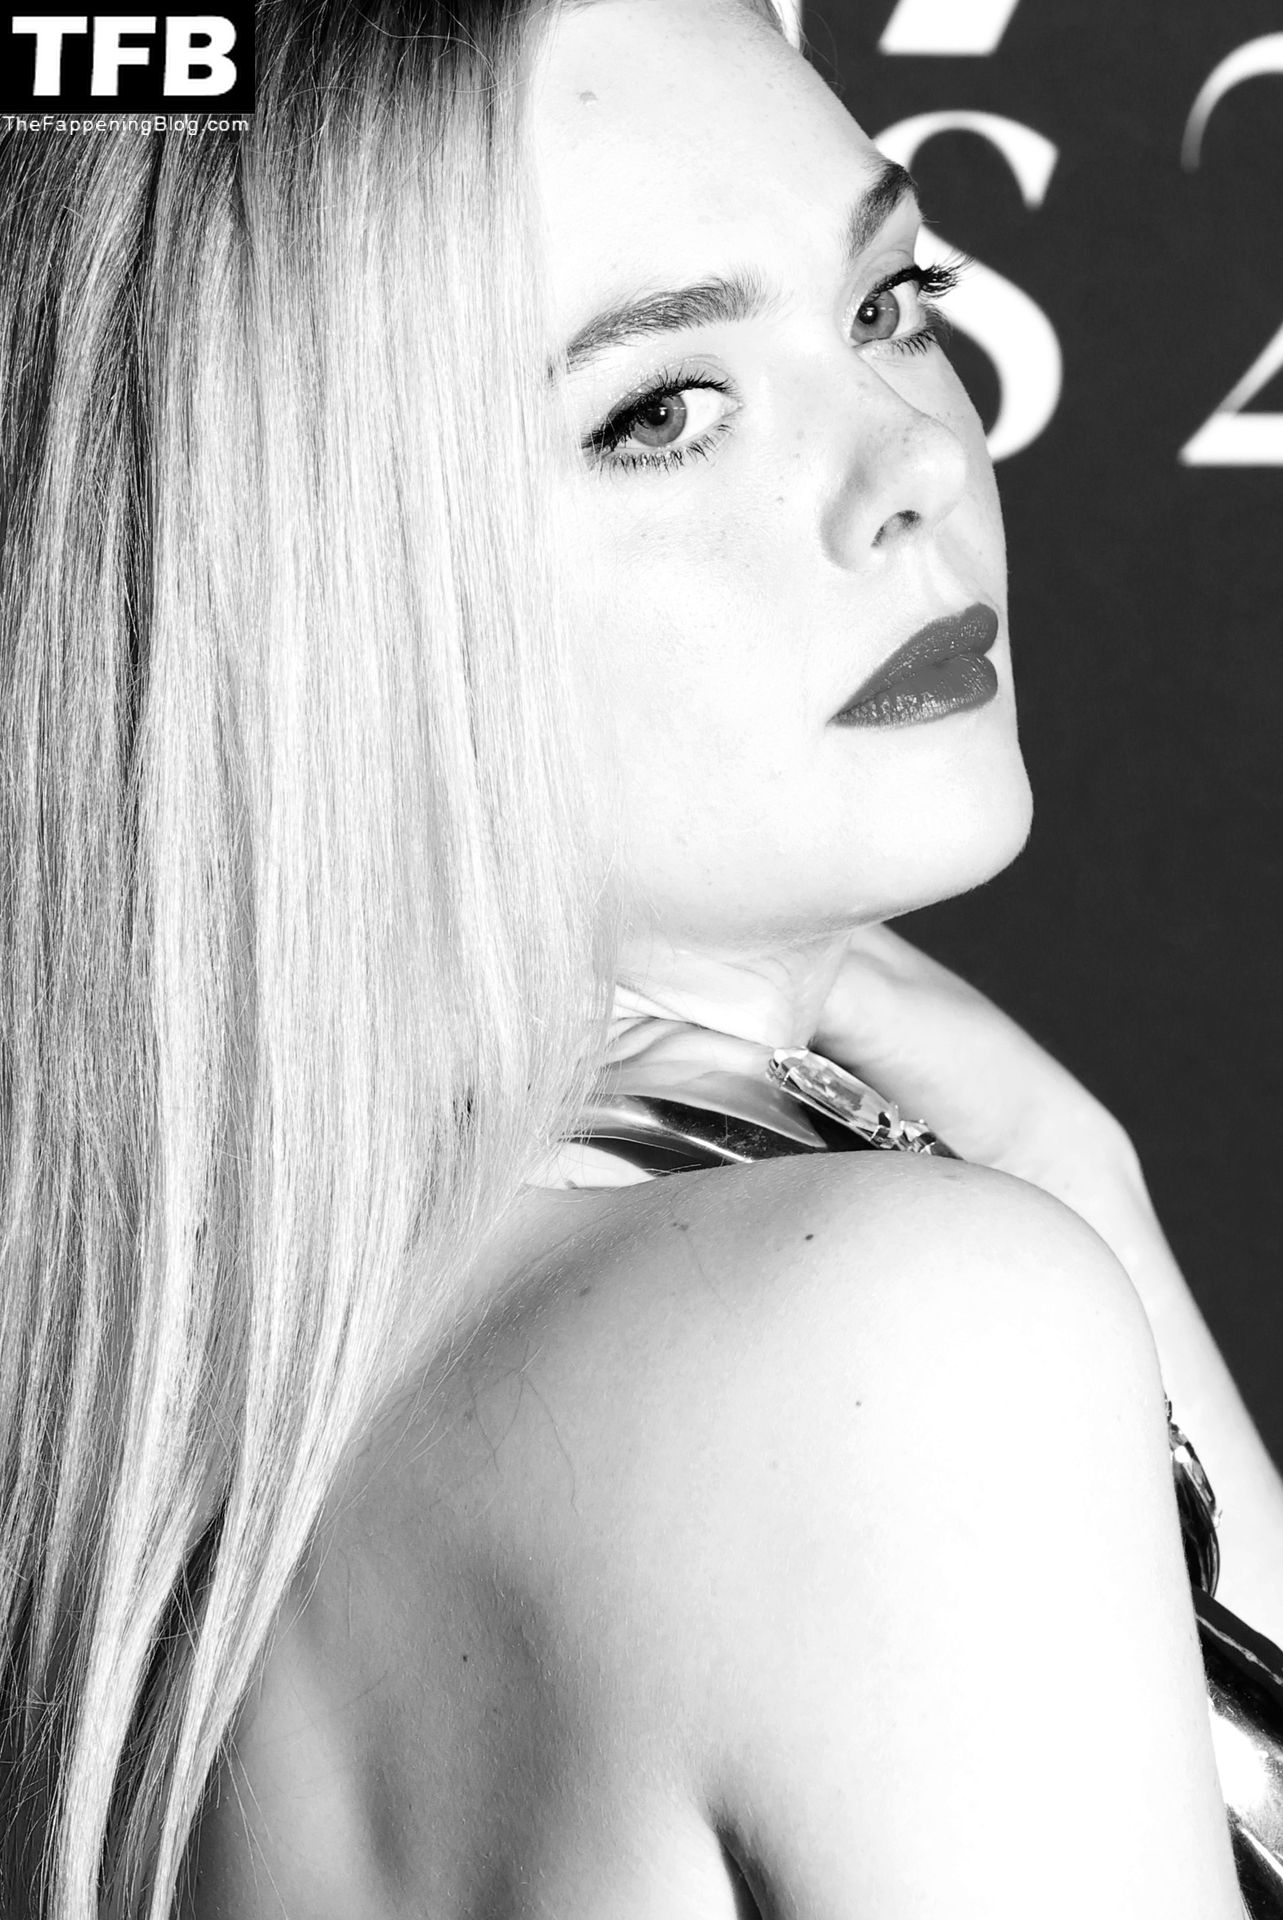 Elle-Fanning-Sexy-Braless-The-Fappening-Blog-36.jpg